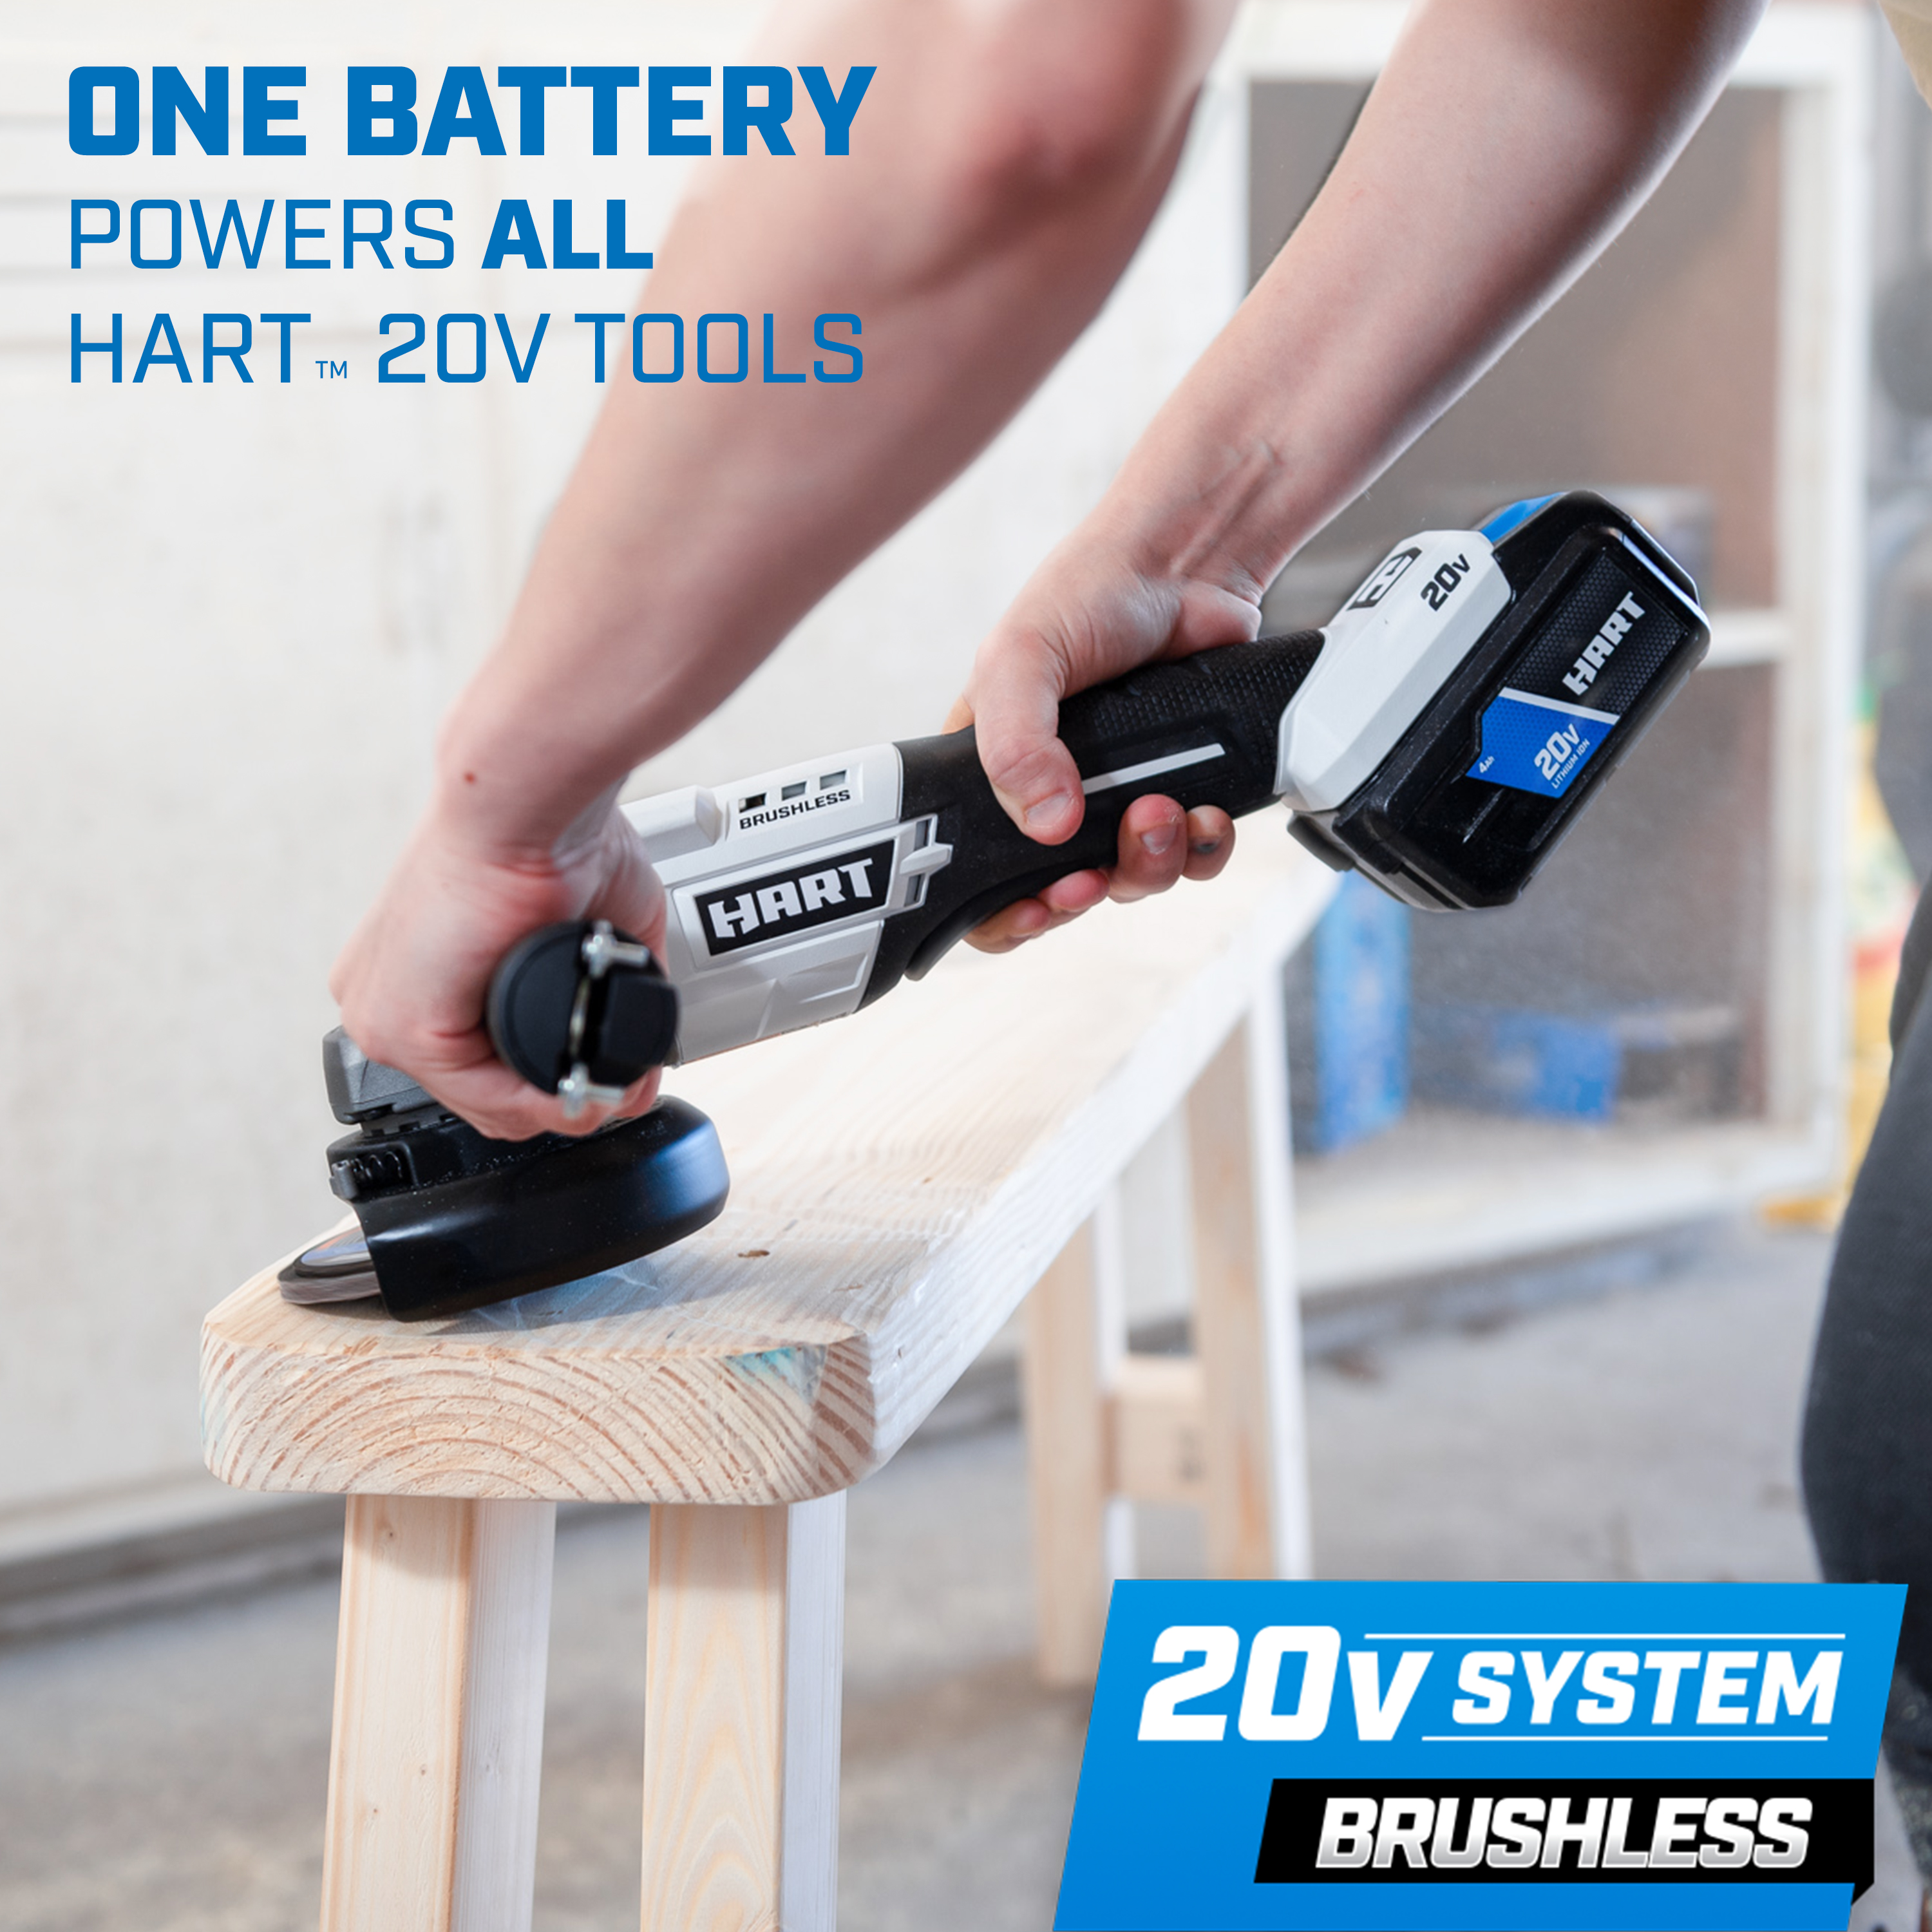 one battery powers all hart 20v tools